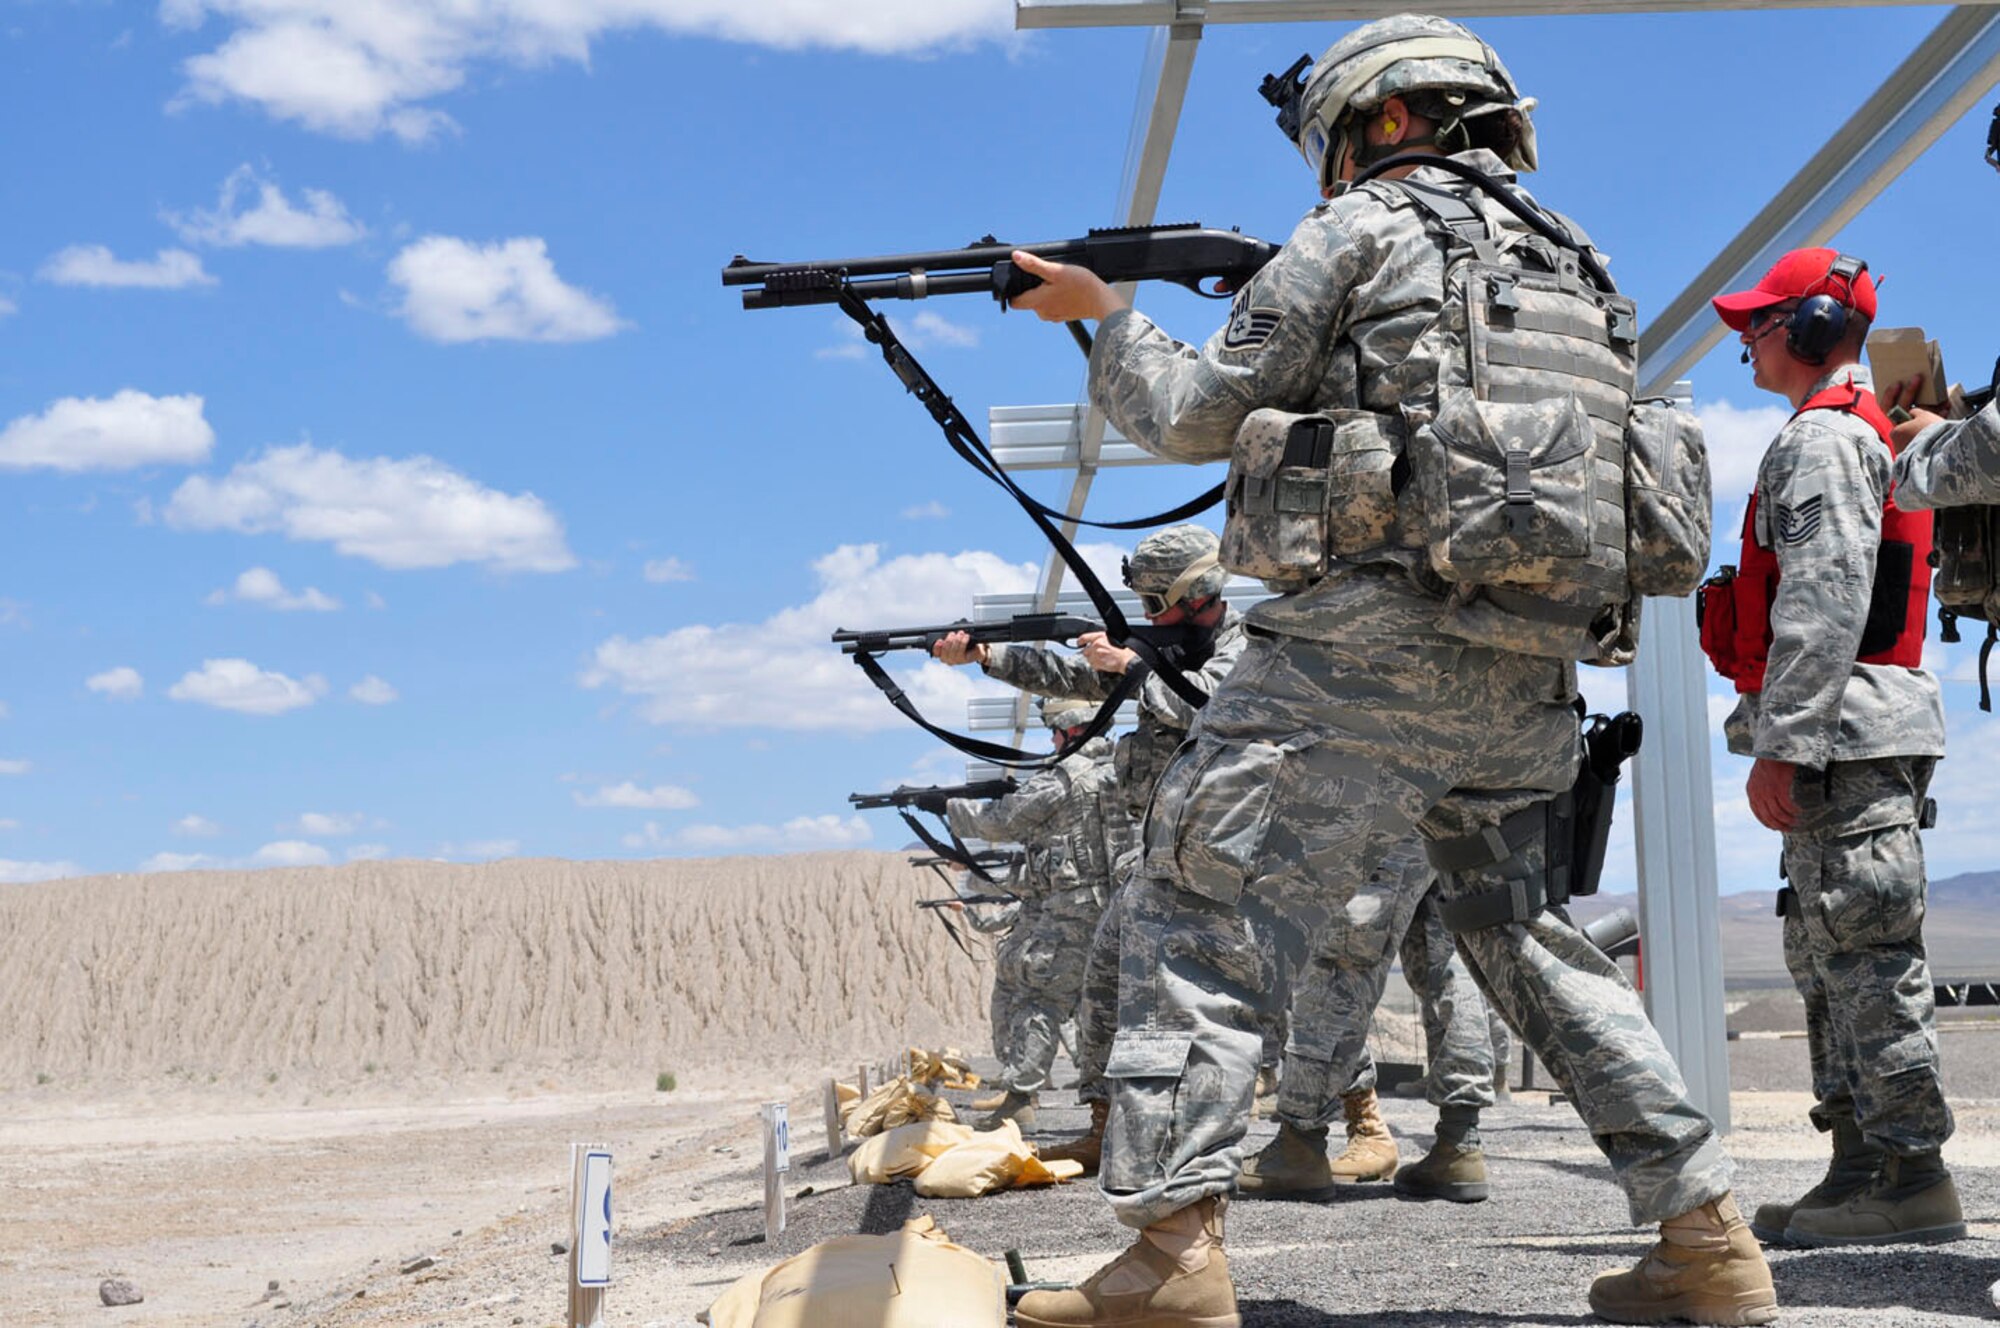 Members of the Nevada Air National Guard's 152nd Airlift Wing practice using 12-gauge shotguns June 14, 2011, on a firing range at Reno Air National Guard Base, Nev. (U.S. Air Force photo)
